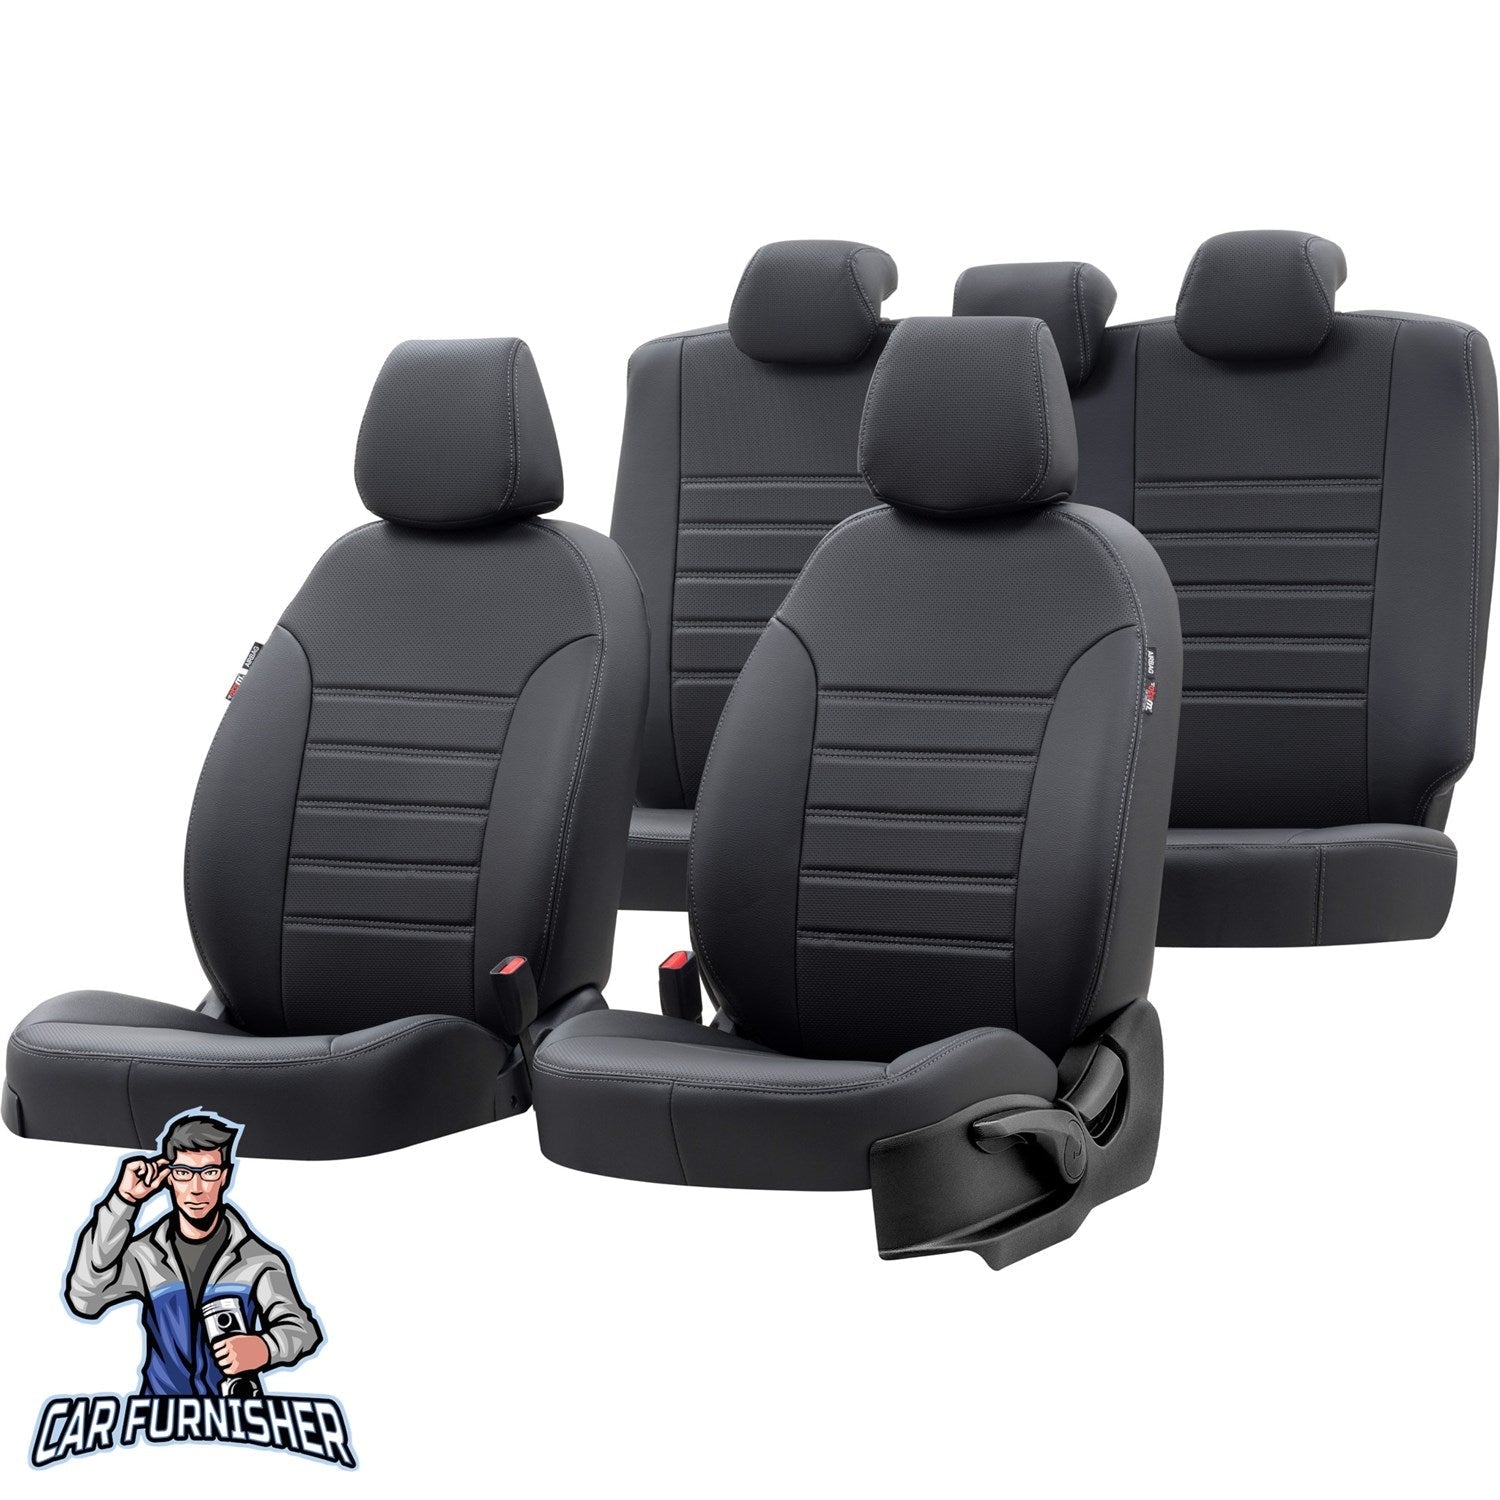 Skoda Roomster Car Seat Covers 2007-2014 New York Design Black Leather